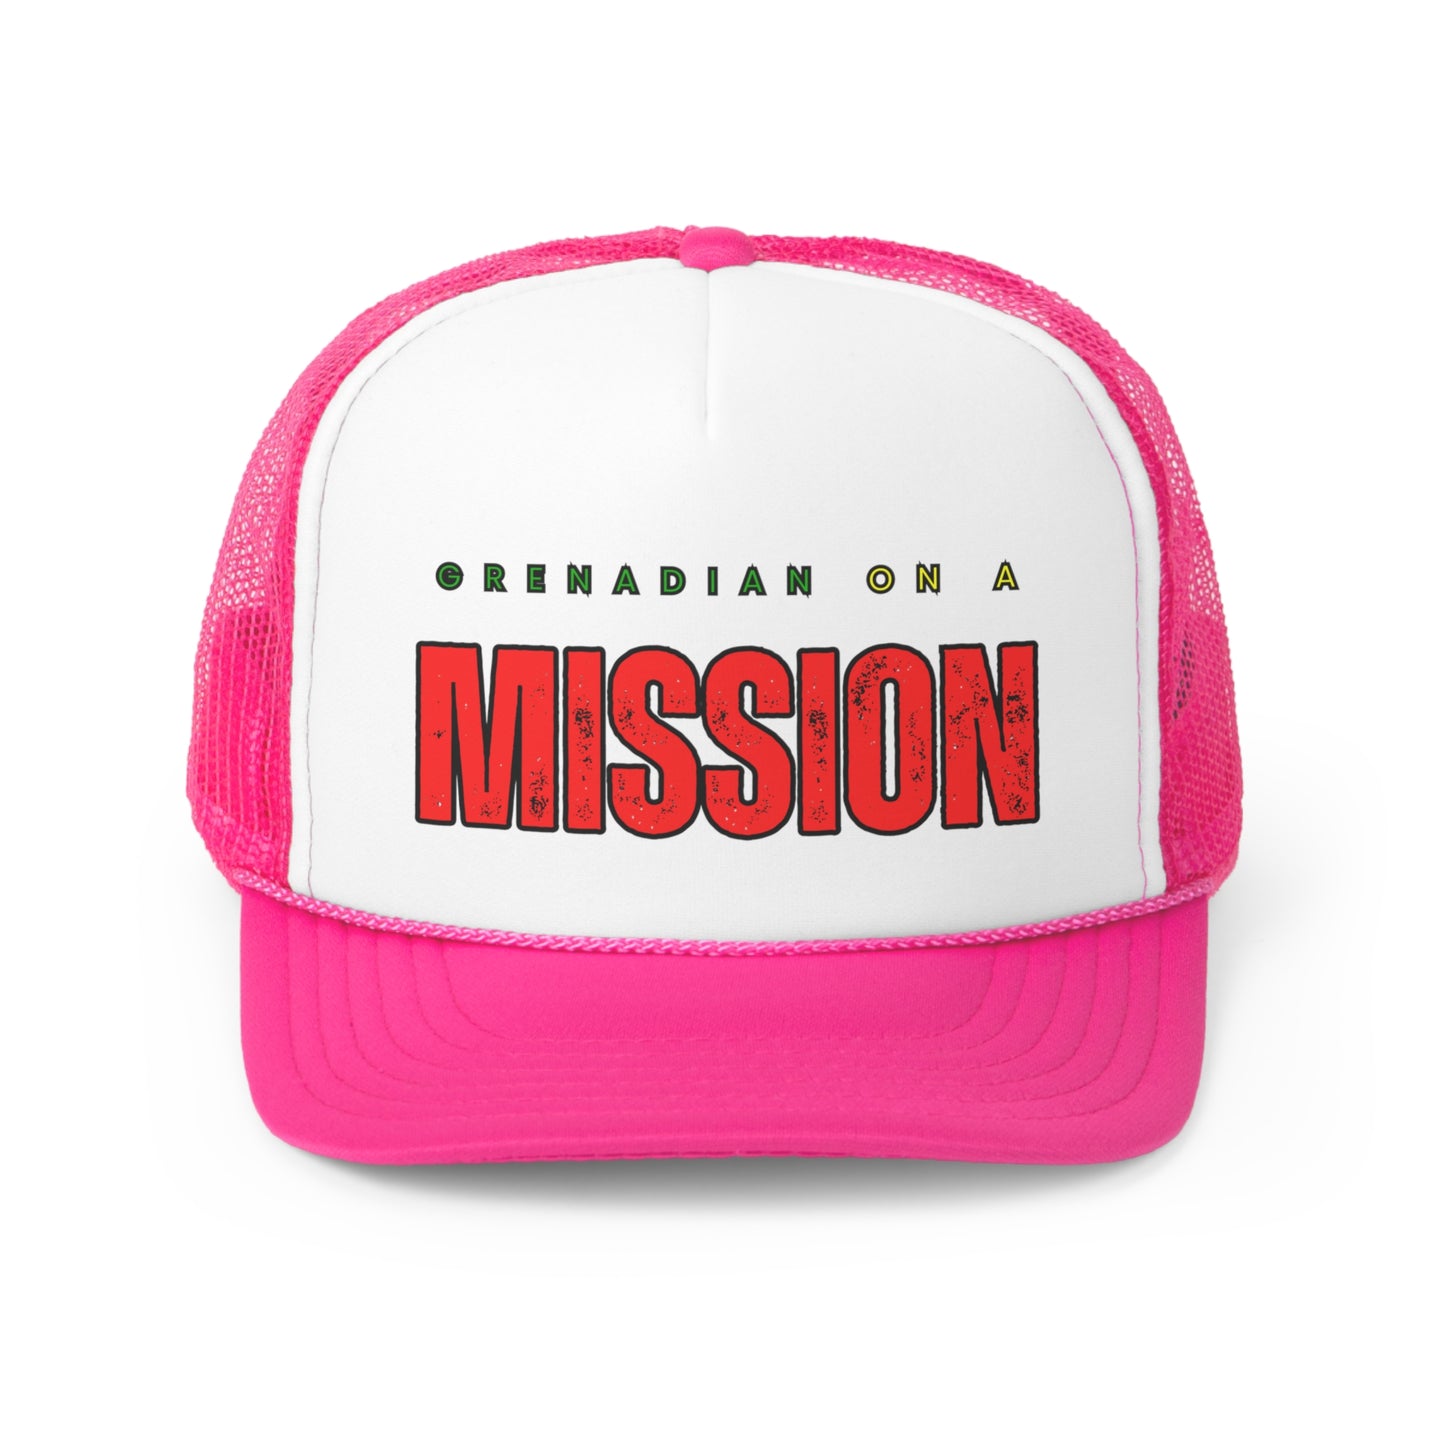 Grenadian on a Mission Trucker Caps